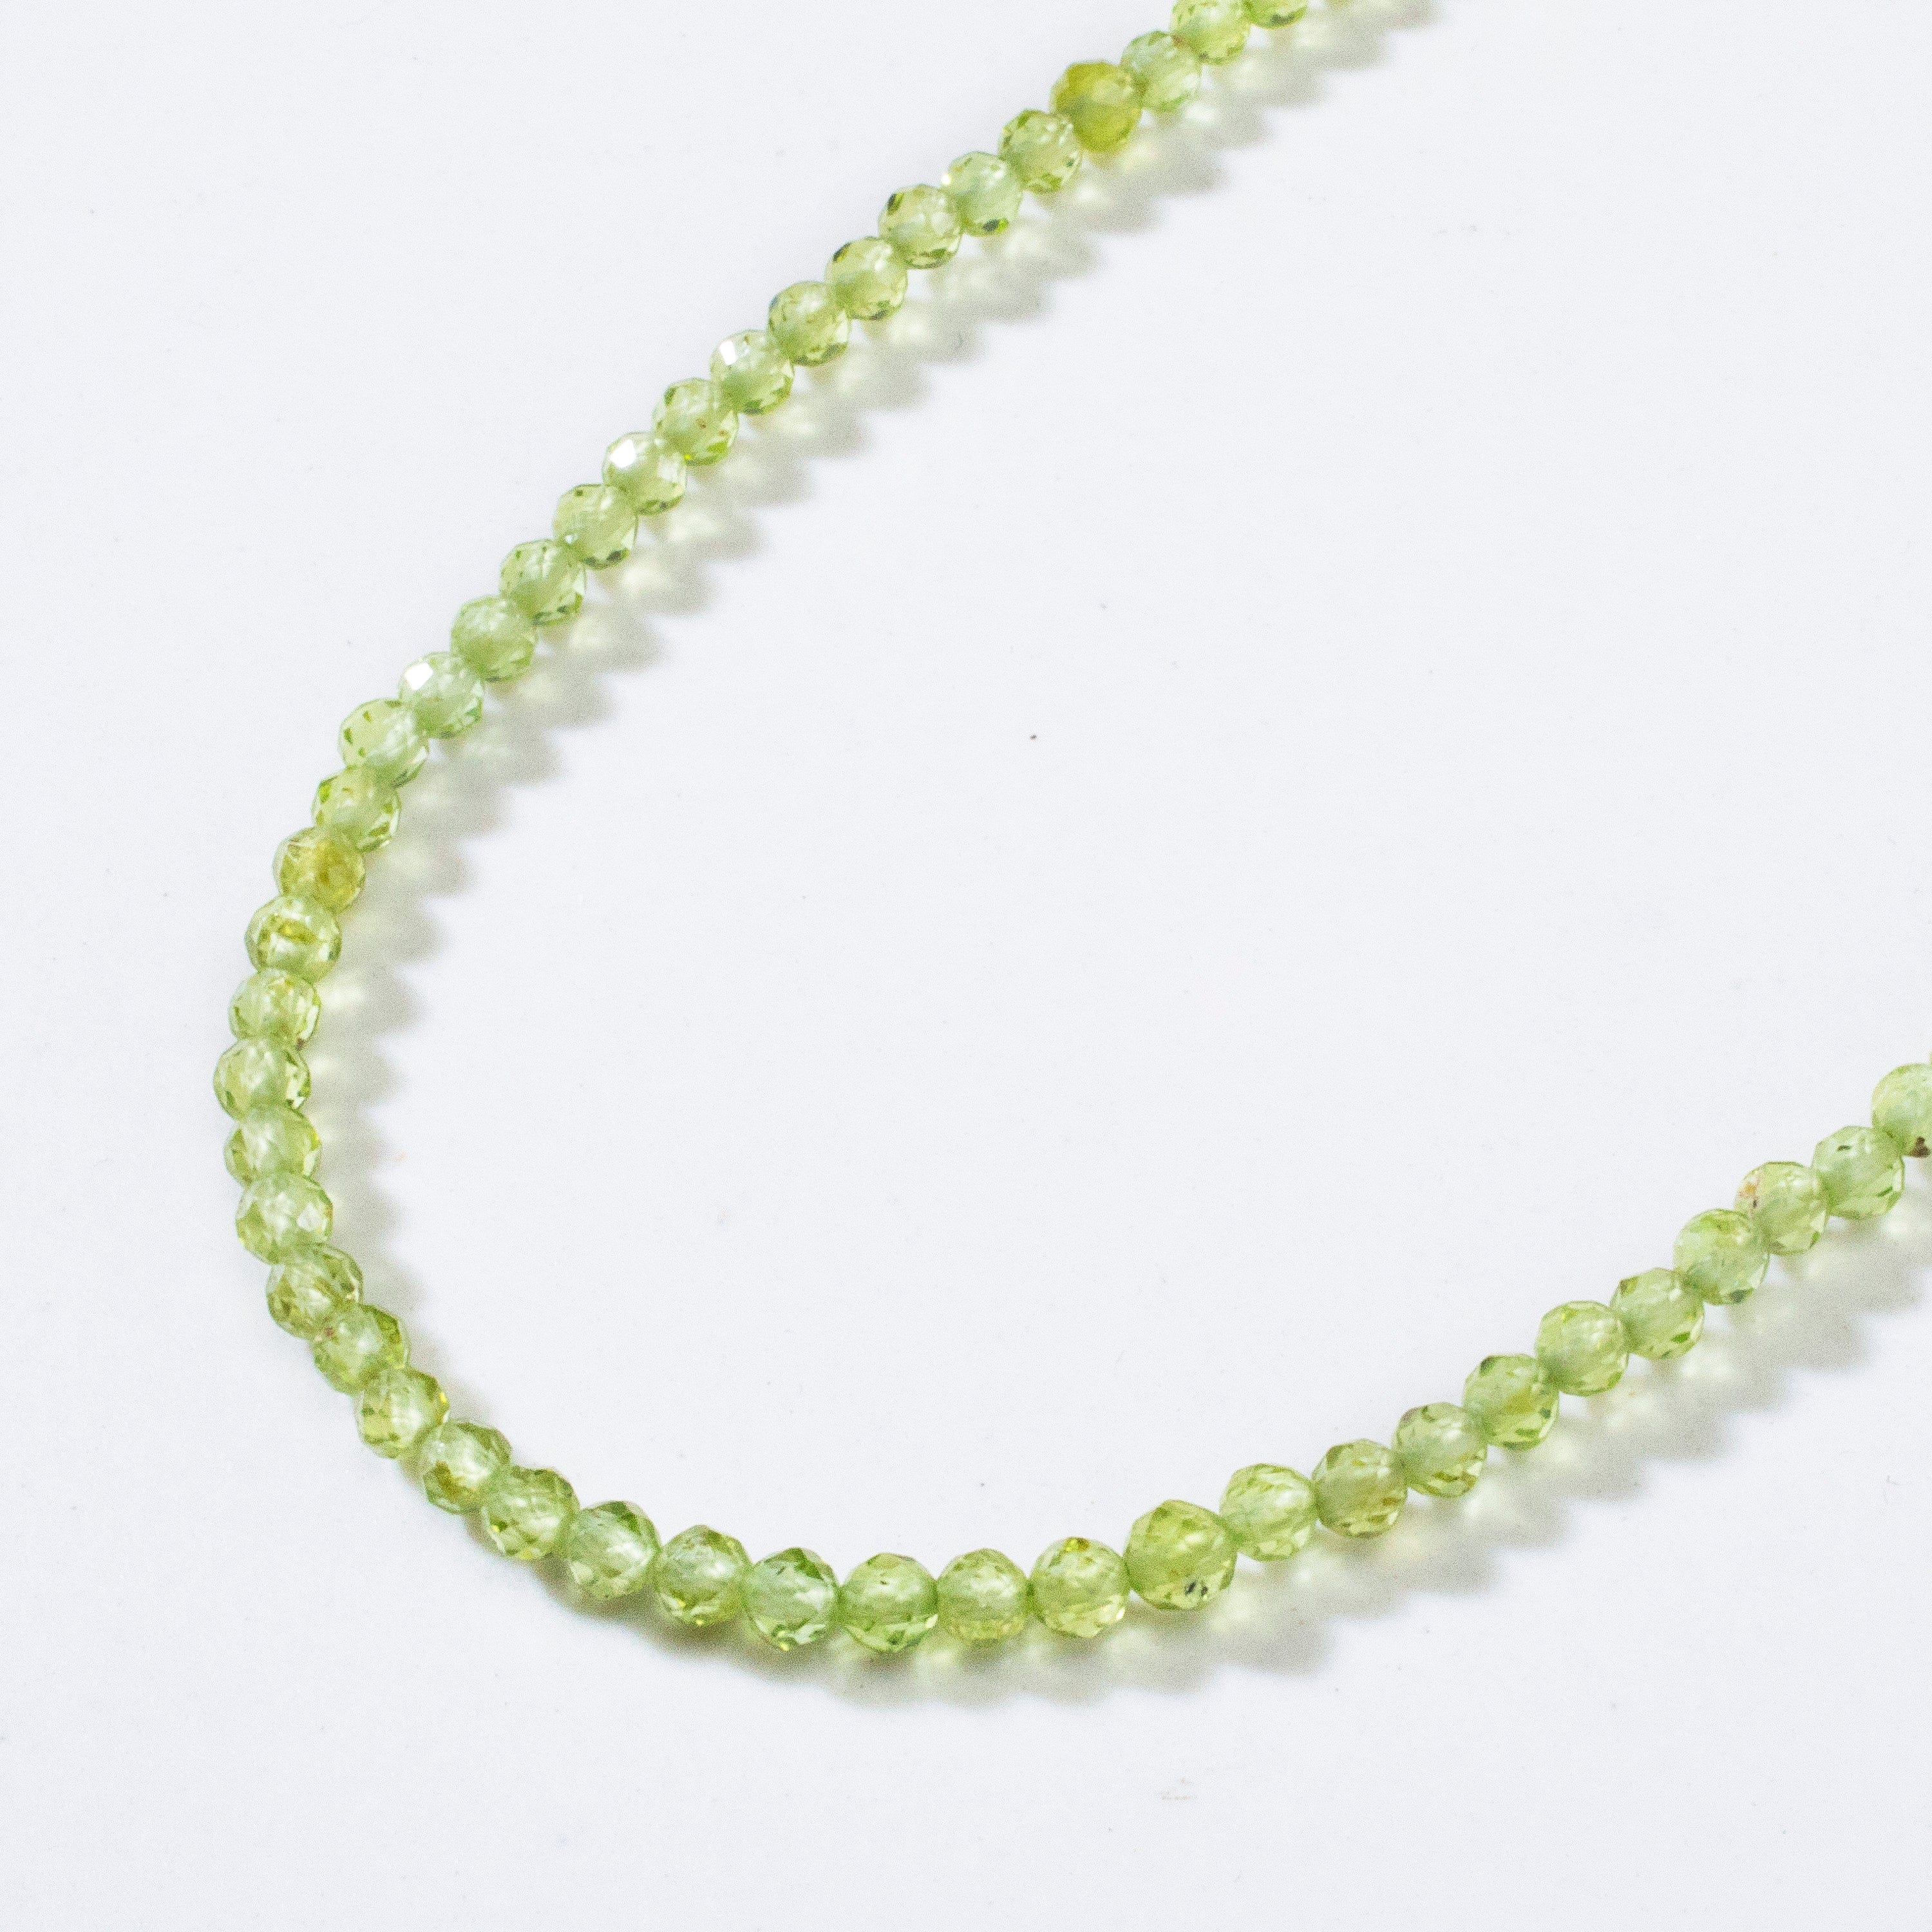 KALIFANO Gemstone Jewelry 3mm Peridot Faceted 31" Necklace / Multi Wrap Bracelet N3-79S-PT